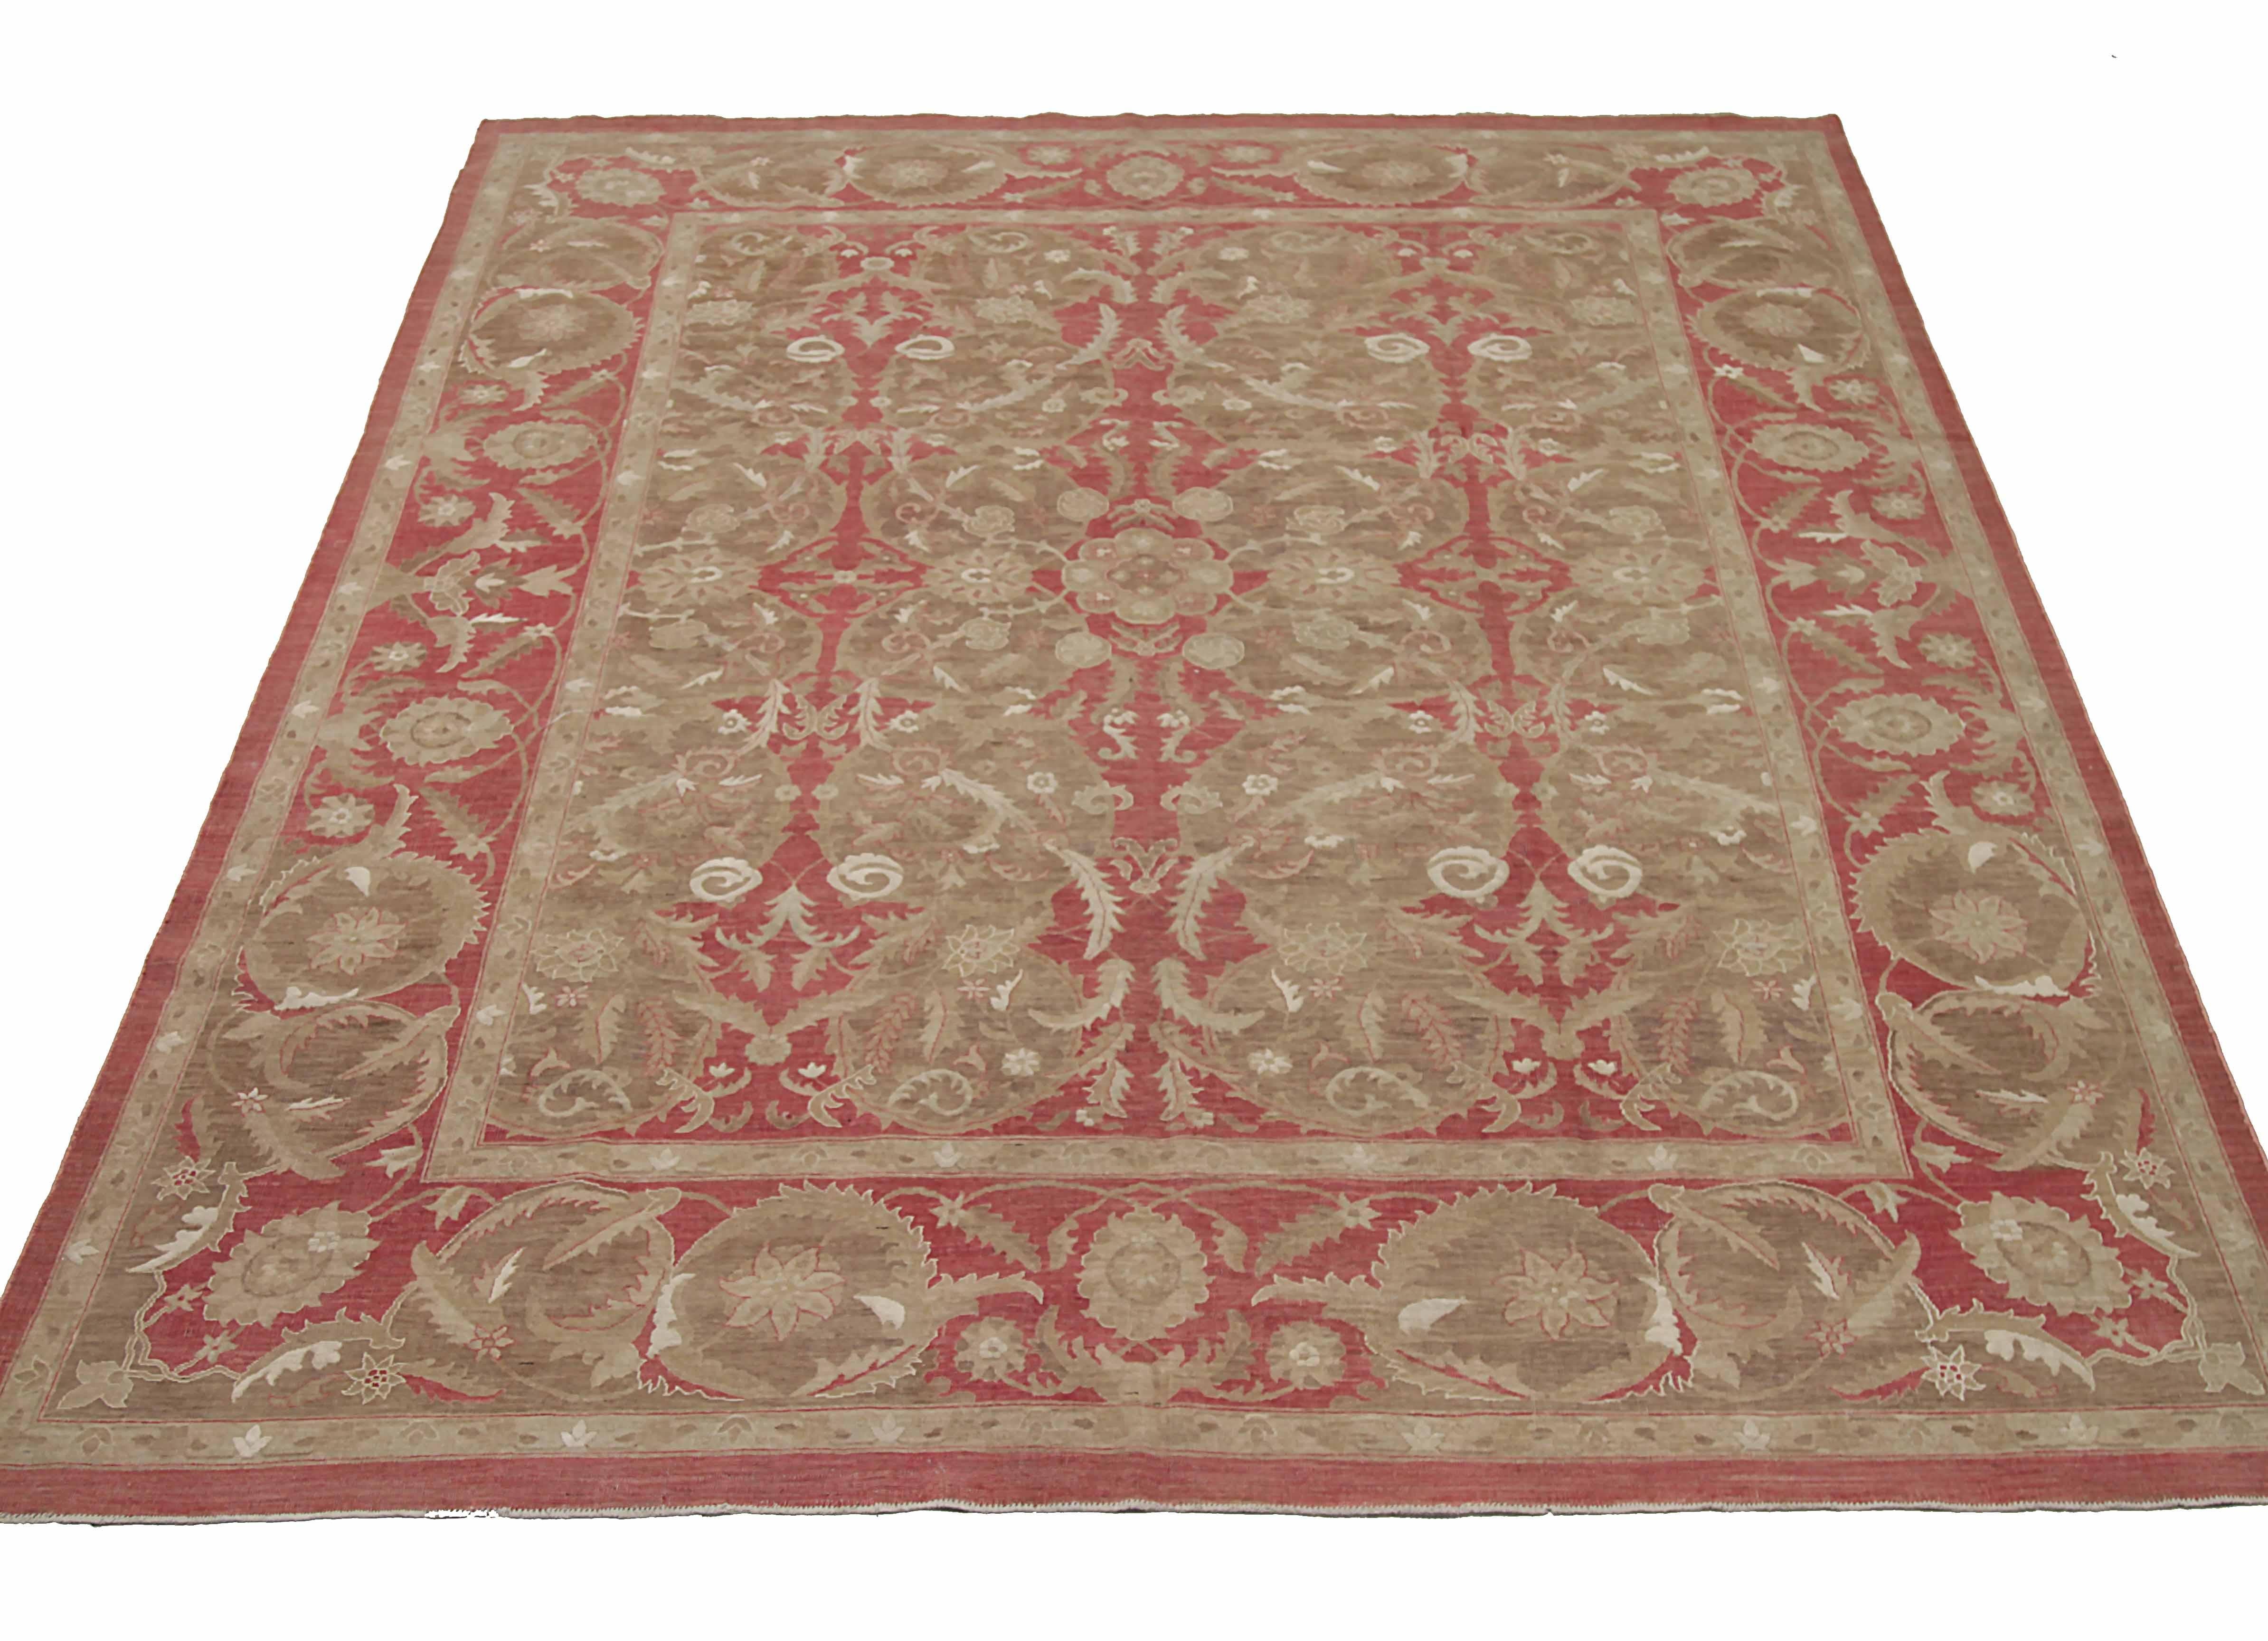 New Afghan area rug handwoven from the finest sheep’s wool. It’s colored with all-natural vegetable dyes that are safe for humans and pets. It’s a Haji Jalili design woven by expert artisans. In addition to the fine weaving, this rug underwent a